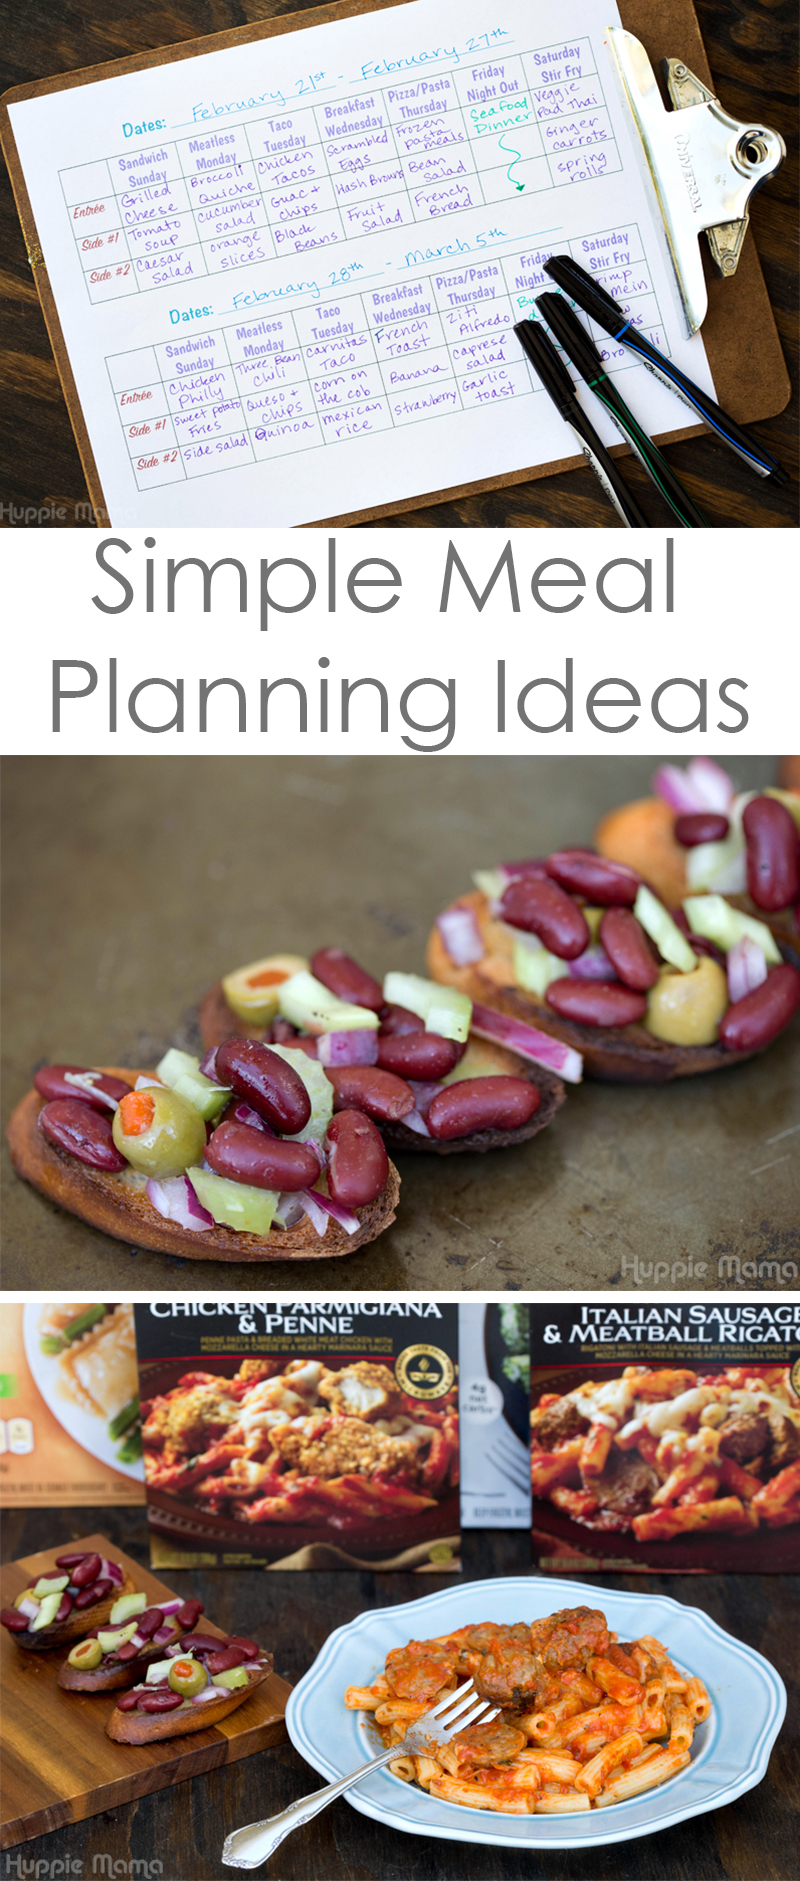 Simple Meal Planning Ideas